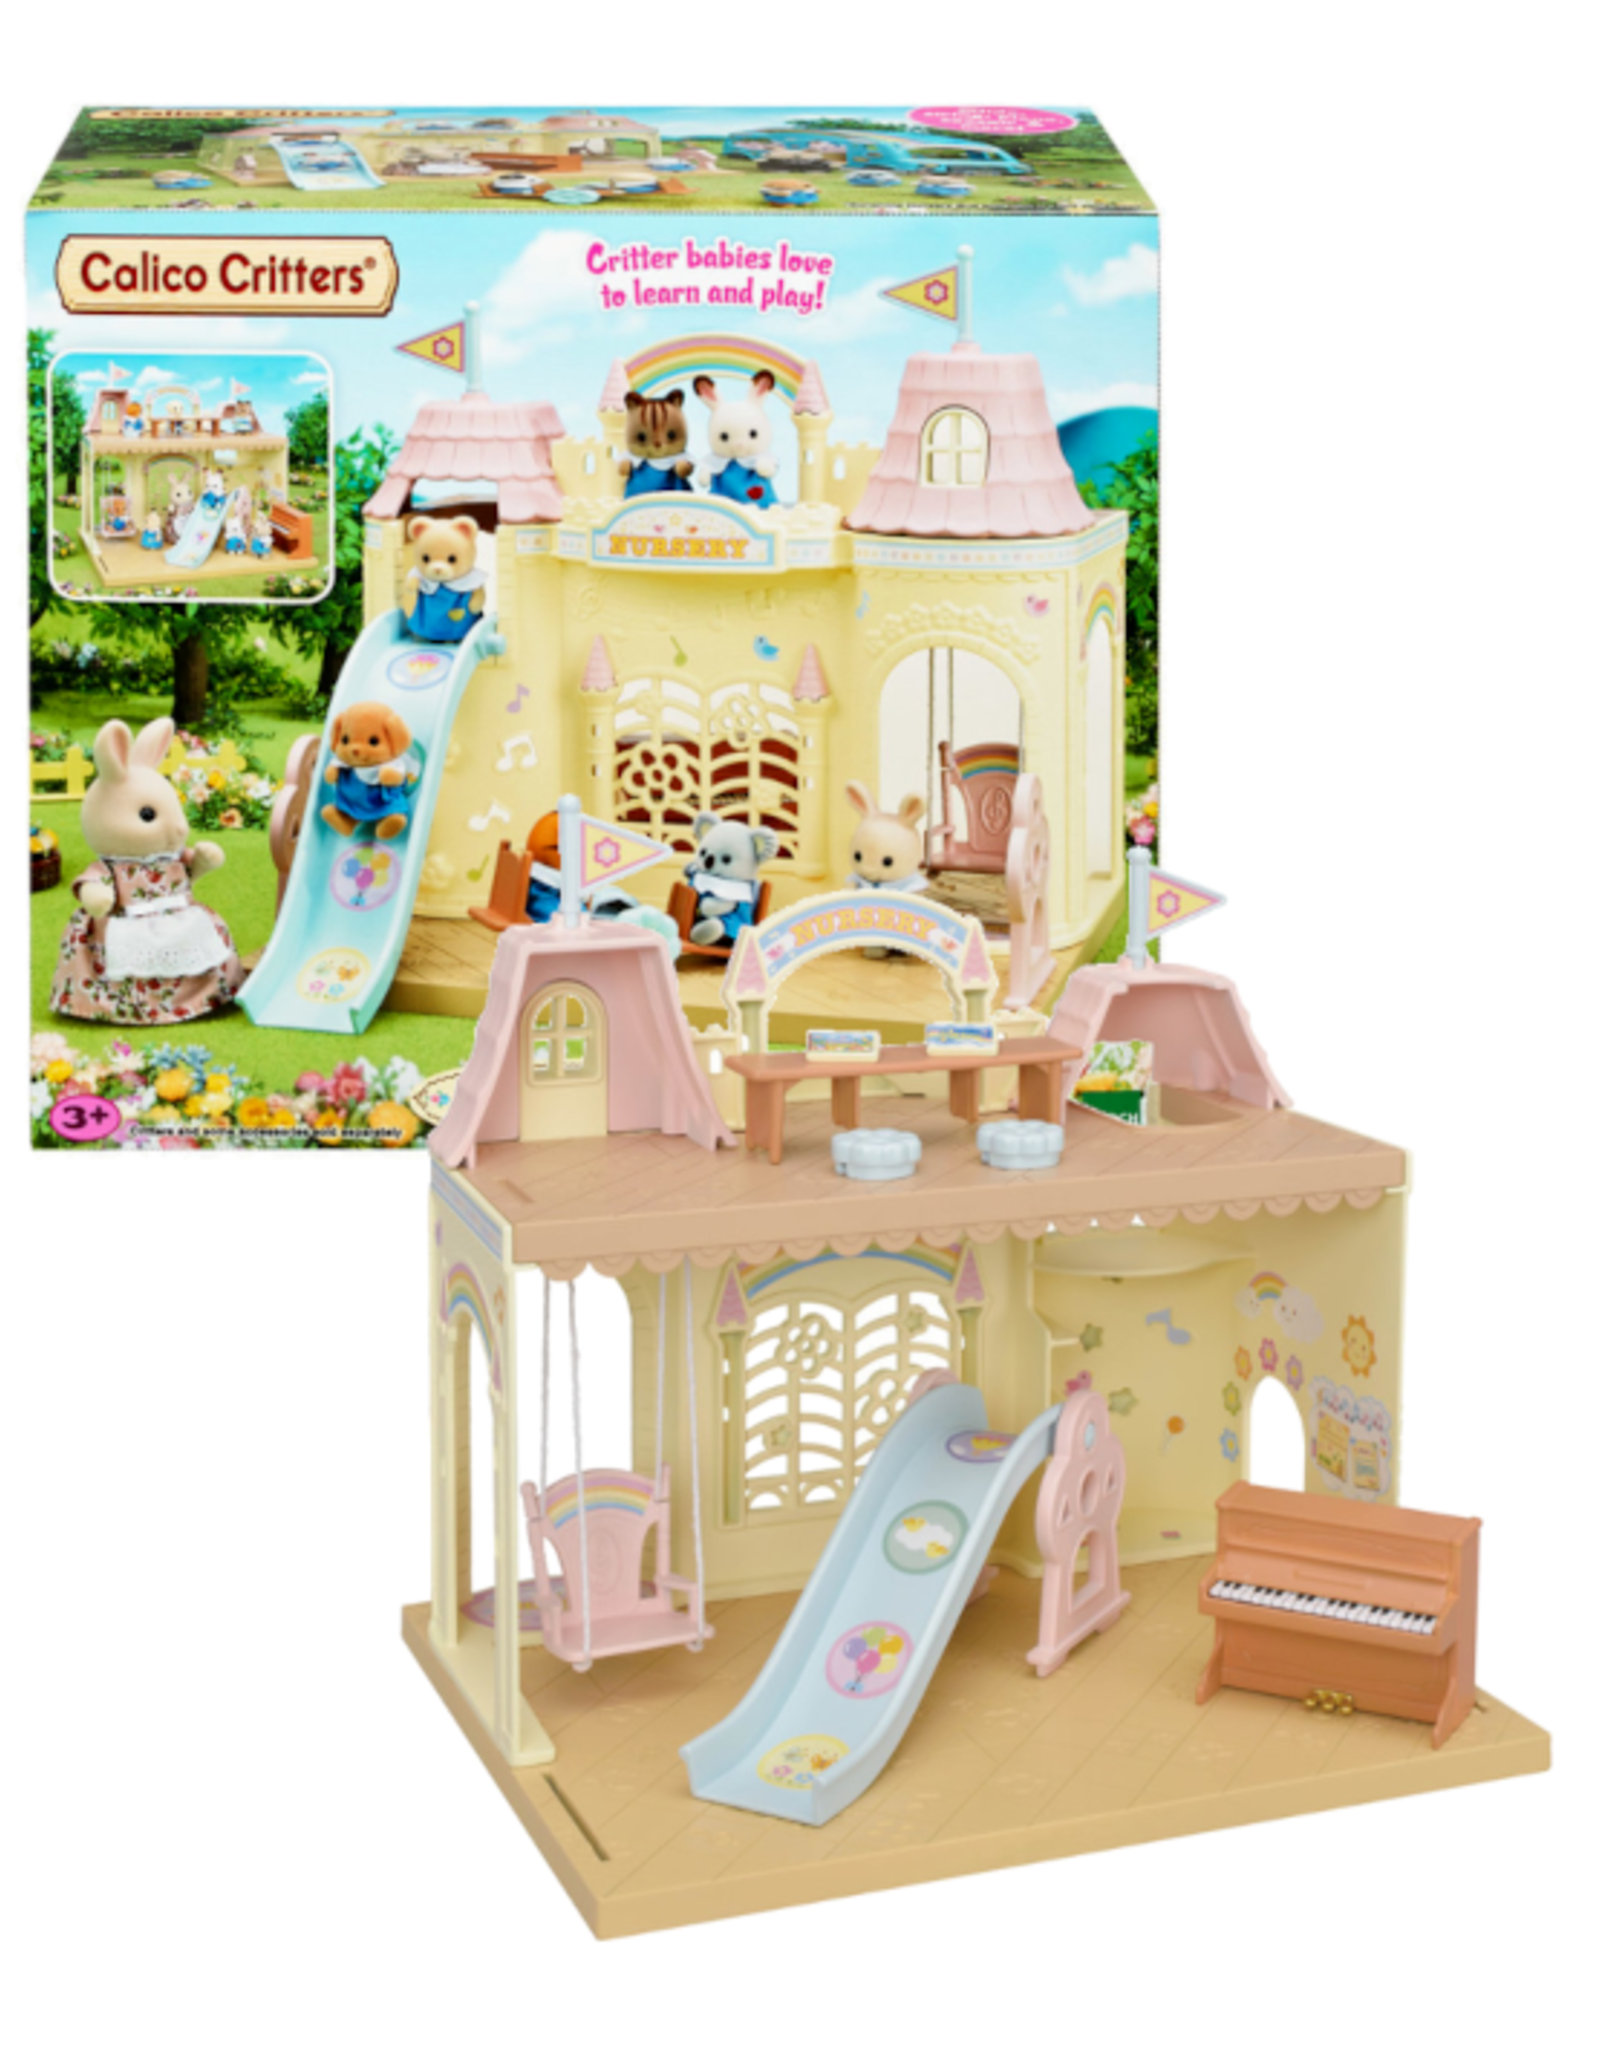 Calico Critters Calico Critters - Baby Castle Nursery